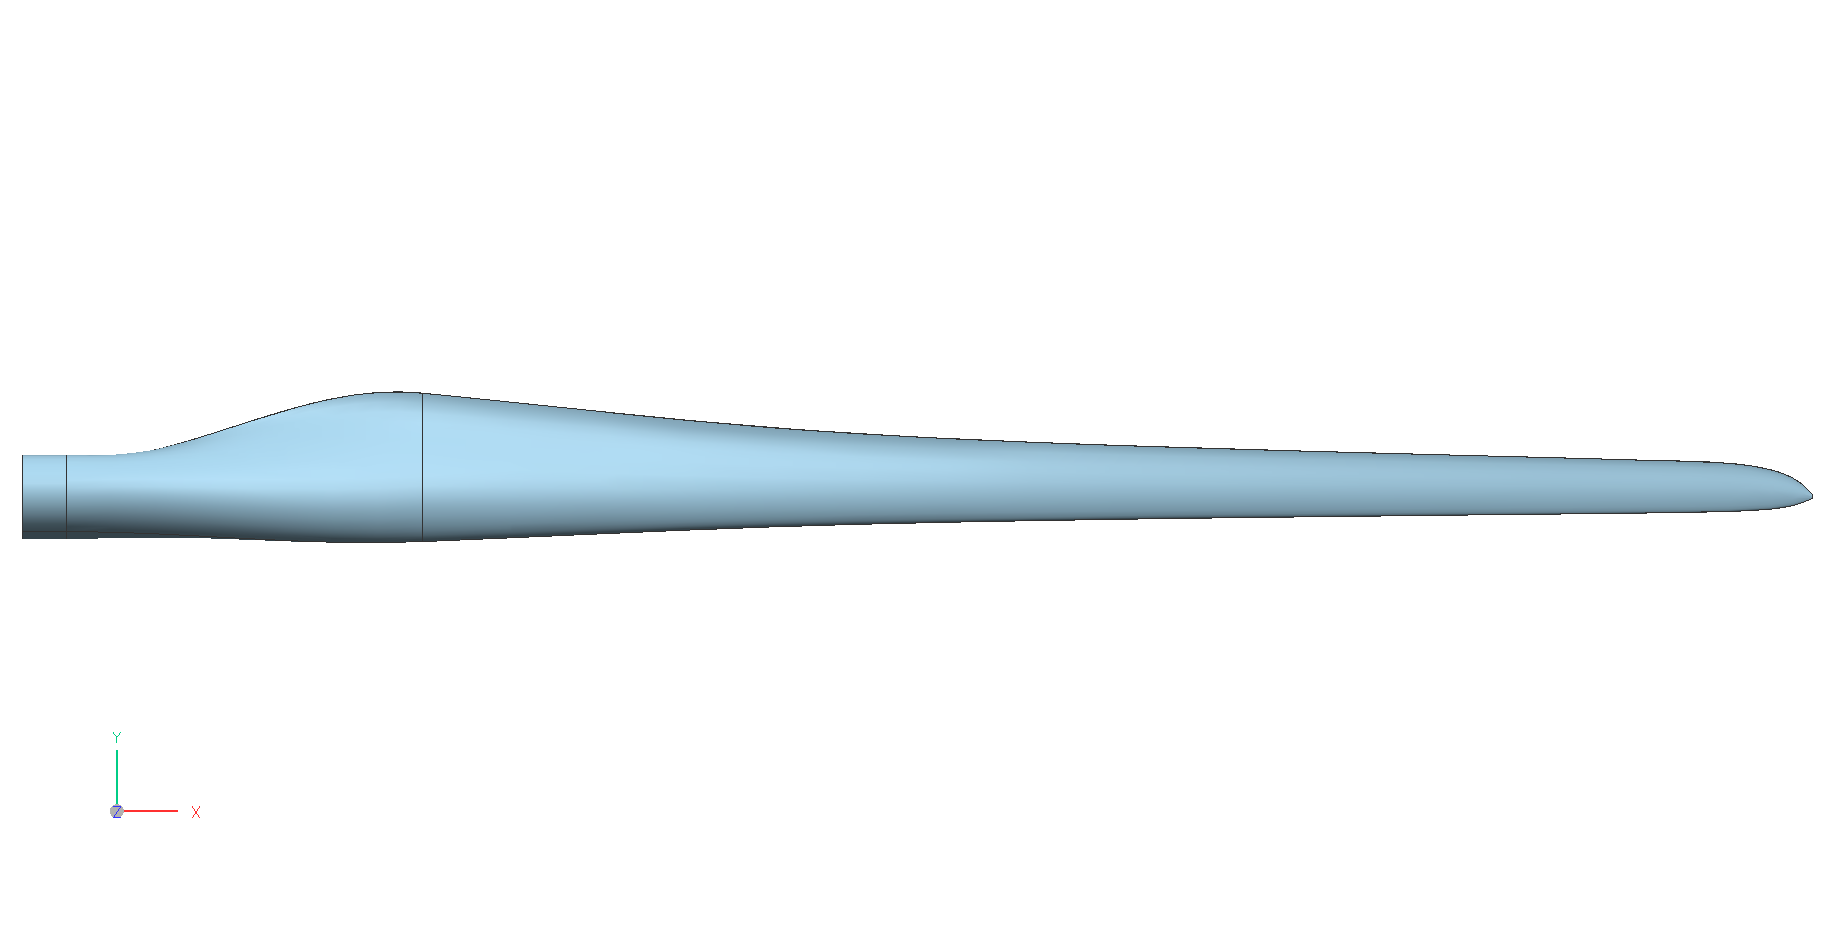 1500kW_40.3m_blade1.png